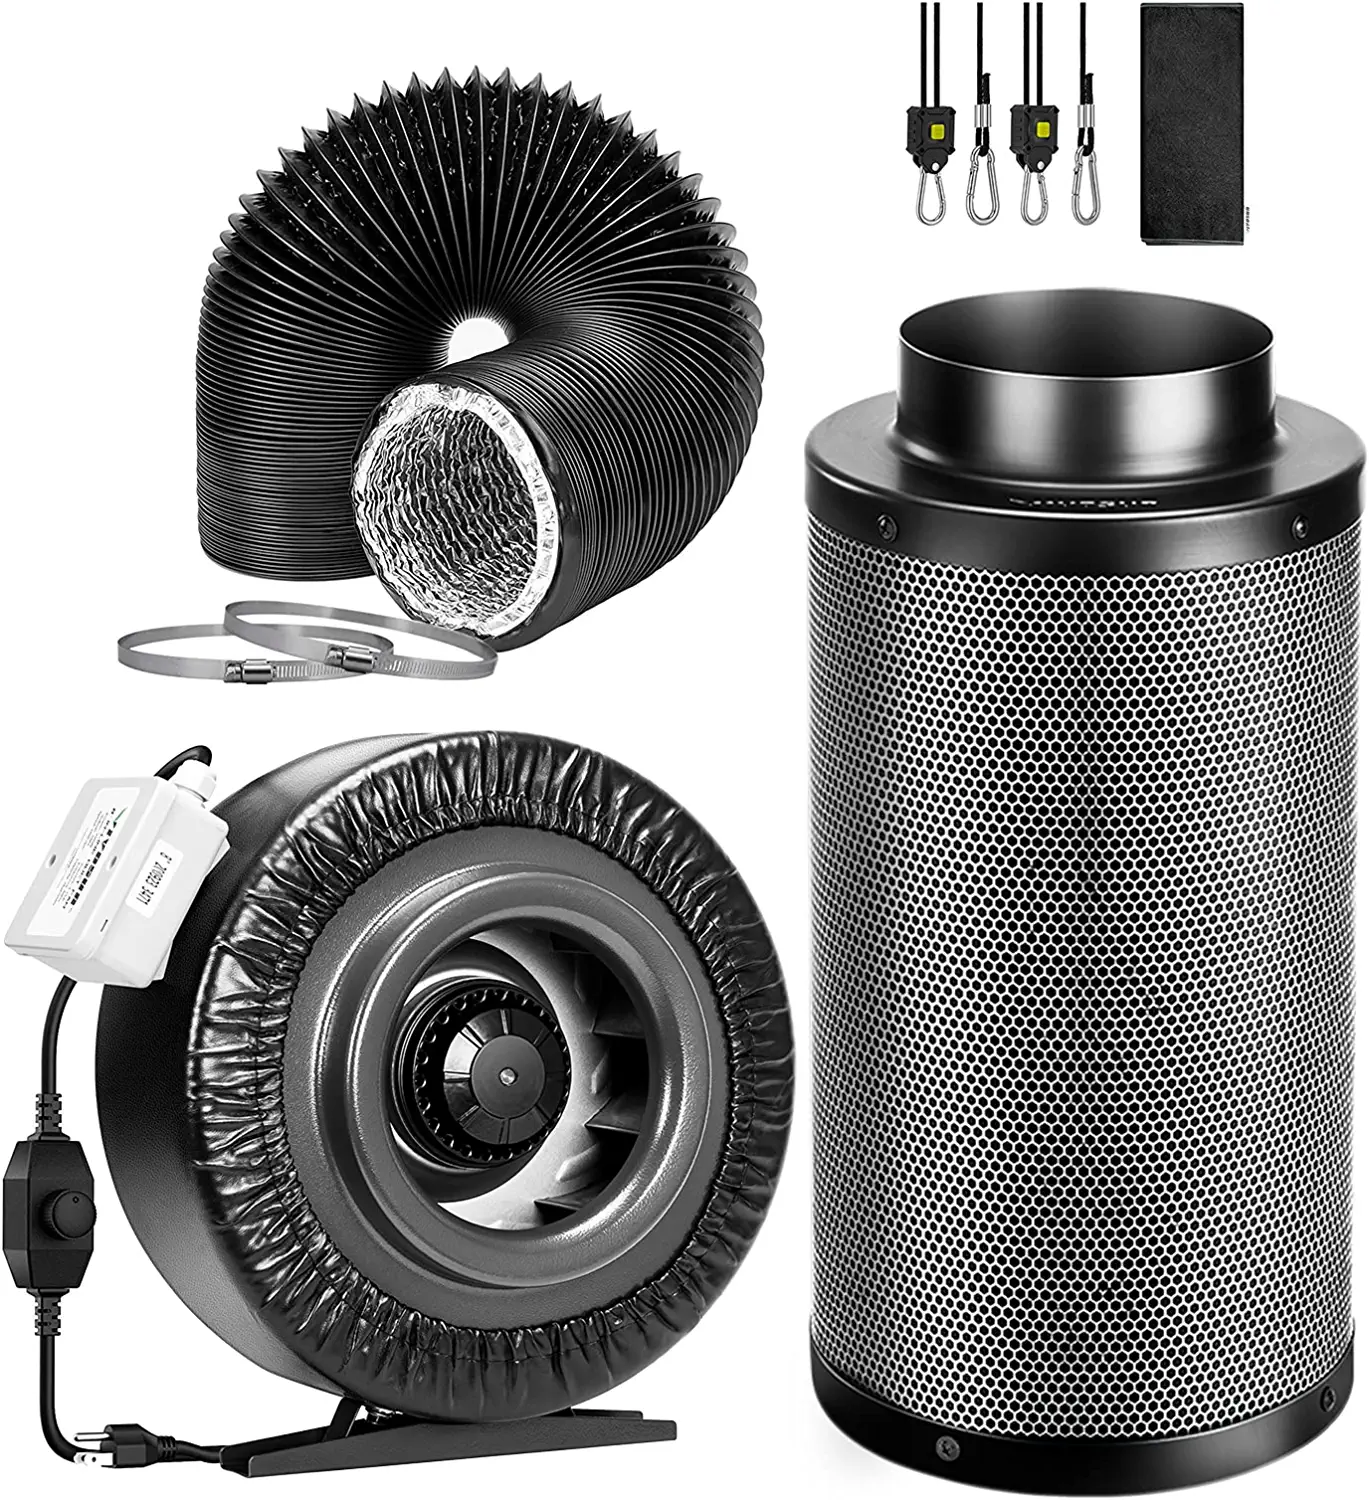 VIVOSUN 8-Inch 740 CFM Inline Duct Fan Kit with Black Carbon Filter and Black Ducting